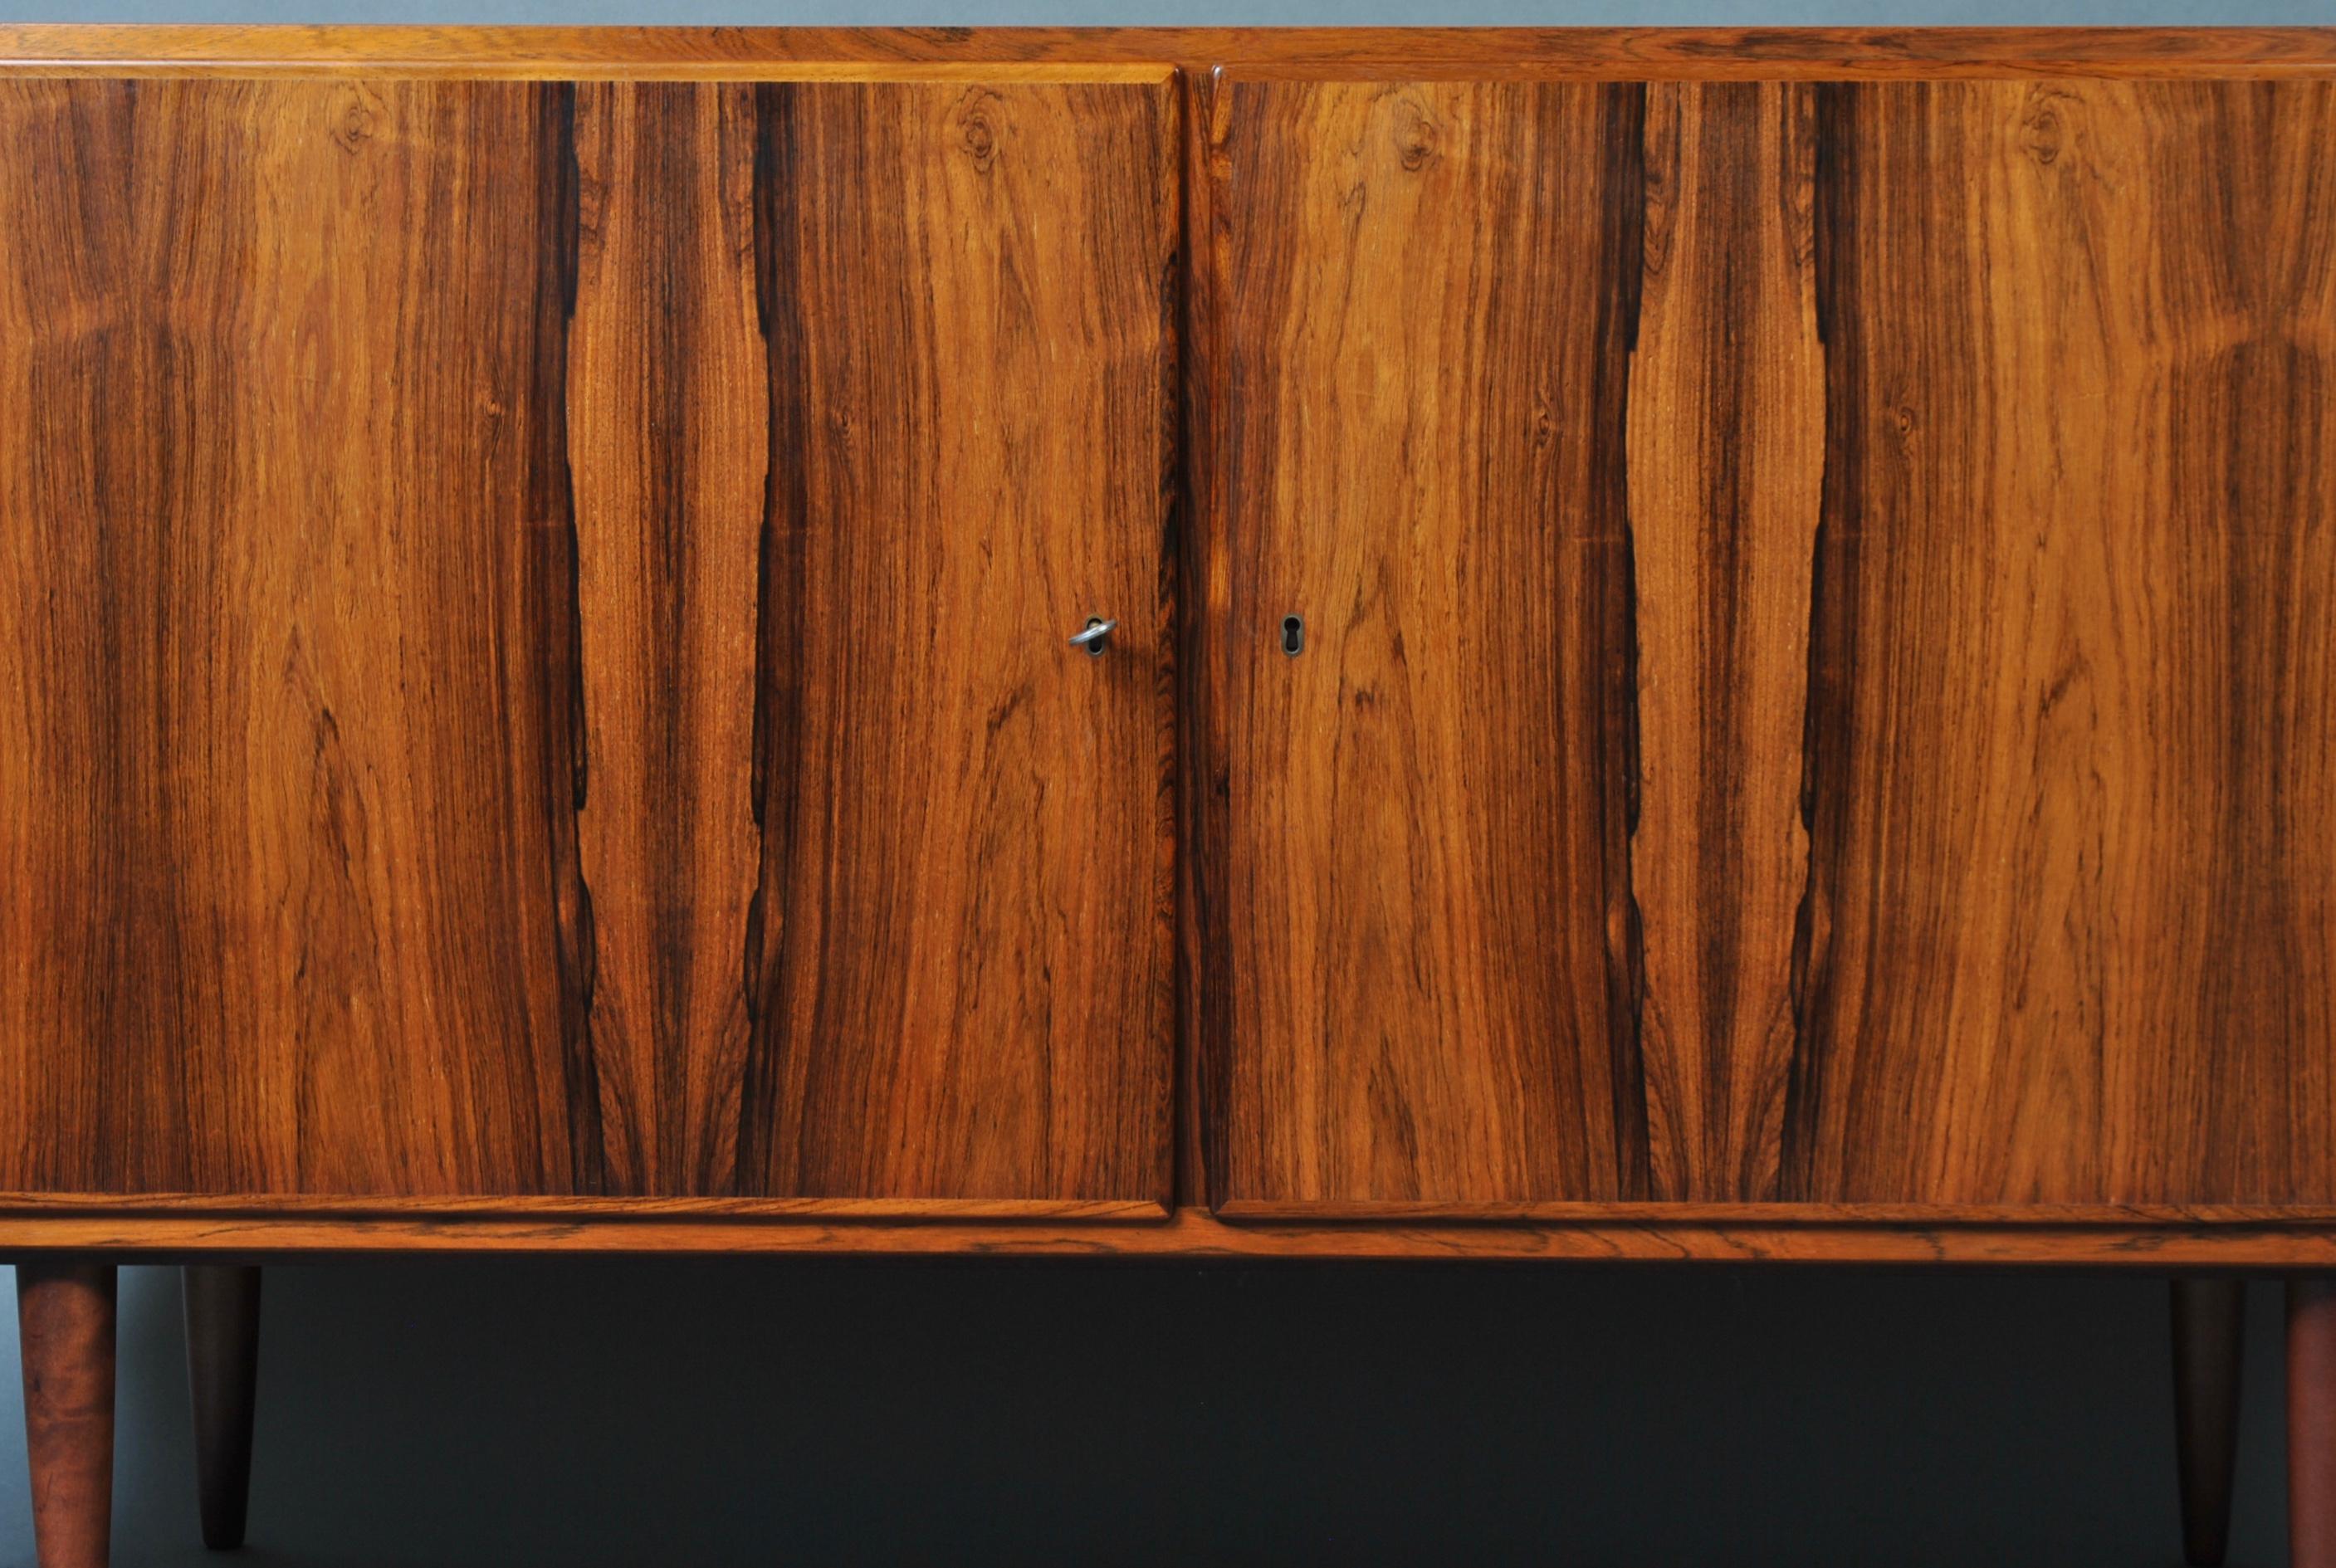 A superb example of a mid-size Danish midcentury Credenza - sideboard by Poul Hundevad. Incredible colouring, figuring and grain. Lockable doors. Maple veneer interior with adjustable shelf one side and 2 adjustable drawers to the other.